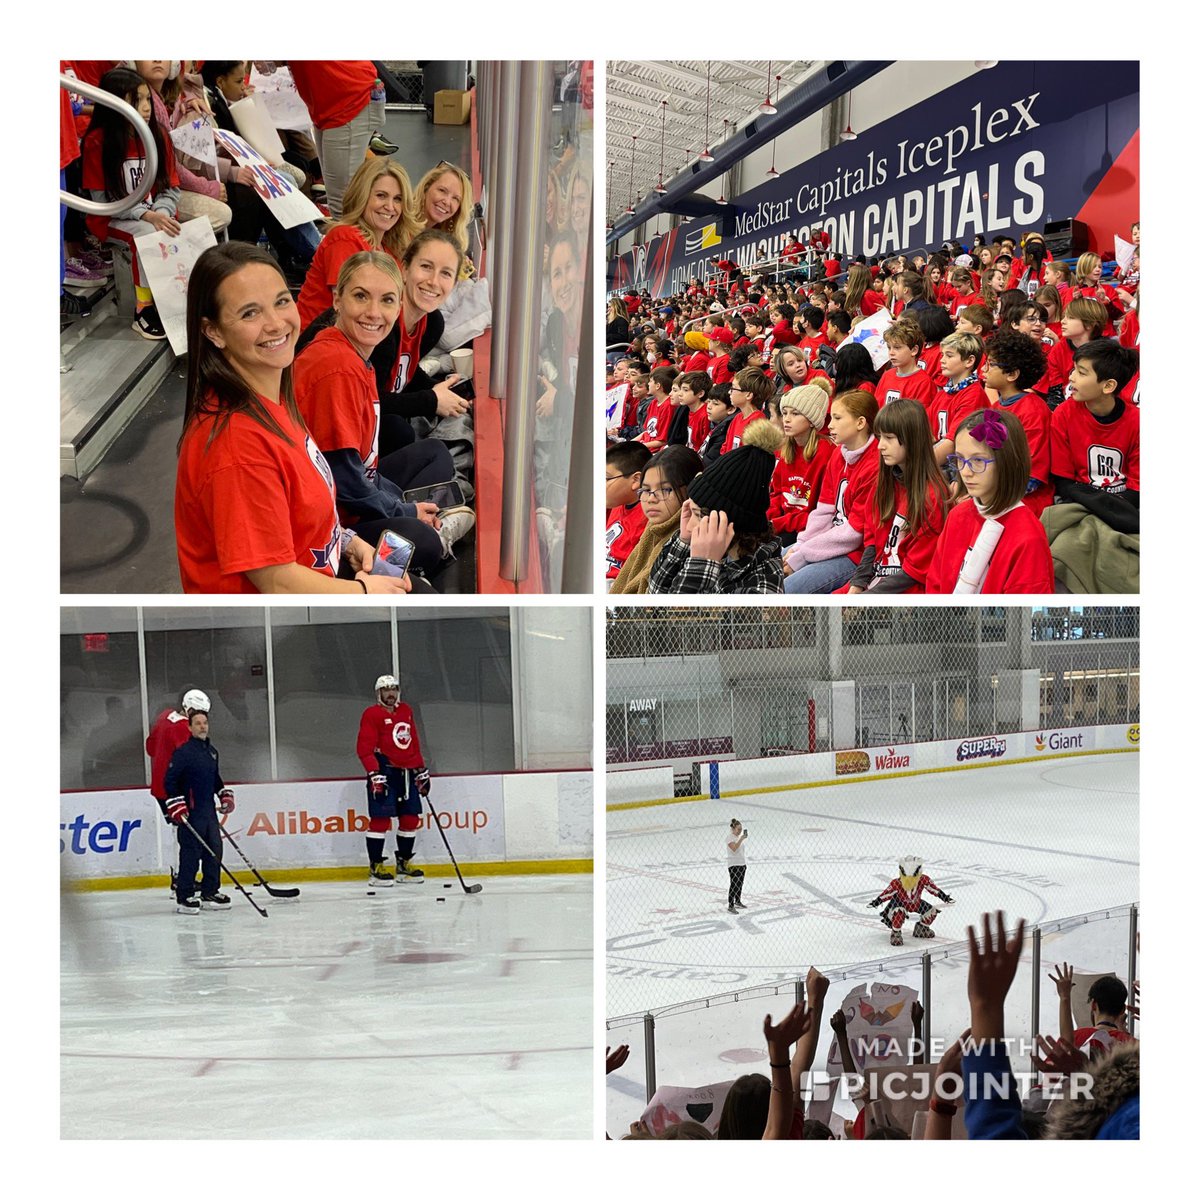 Amazing day for Glebe 4th and 5th graders as well as four other schools. <a target='_blank' href='http://twitter.com/Capitals'>@Capitals</a> <a target='_blank' href='http://twitter.com/glebepta'>@glebepta</a> <a target='_blank' href='http://twitter.com/APSHPEAthletics'>@APSHPEAthletics</a> <a target='_blank' href='http://twitter.com/ArlingtonPublic'>@ArlingtonPublic</a> <a target='_blank' href='http://search.twitter.com/search?q=GlebeEagles'><a target='_blank' href='https://twitter.com/hashtag/GlebeEagles?src=hash'>#GlebeEagles</a></a> <a target='_blank' href='https://t.co/uce8Ny2c4A'>https://t.co/uce8Ny2c4A</a>